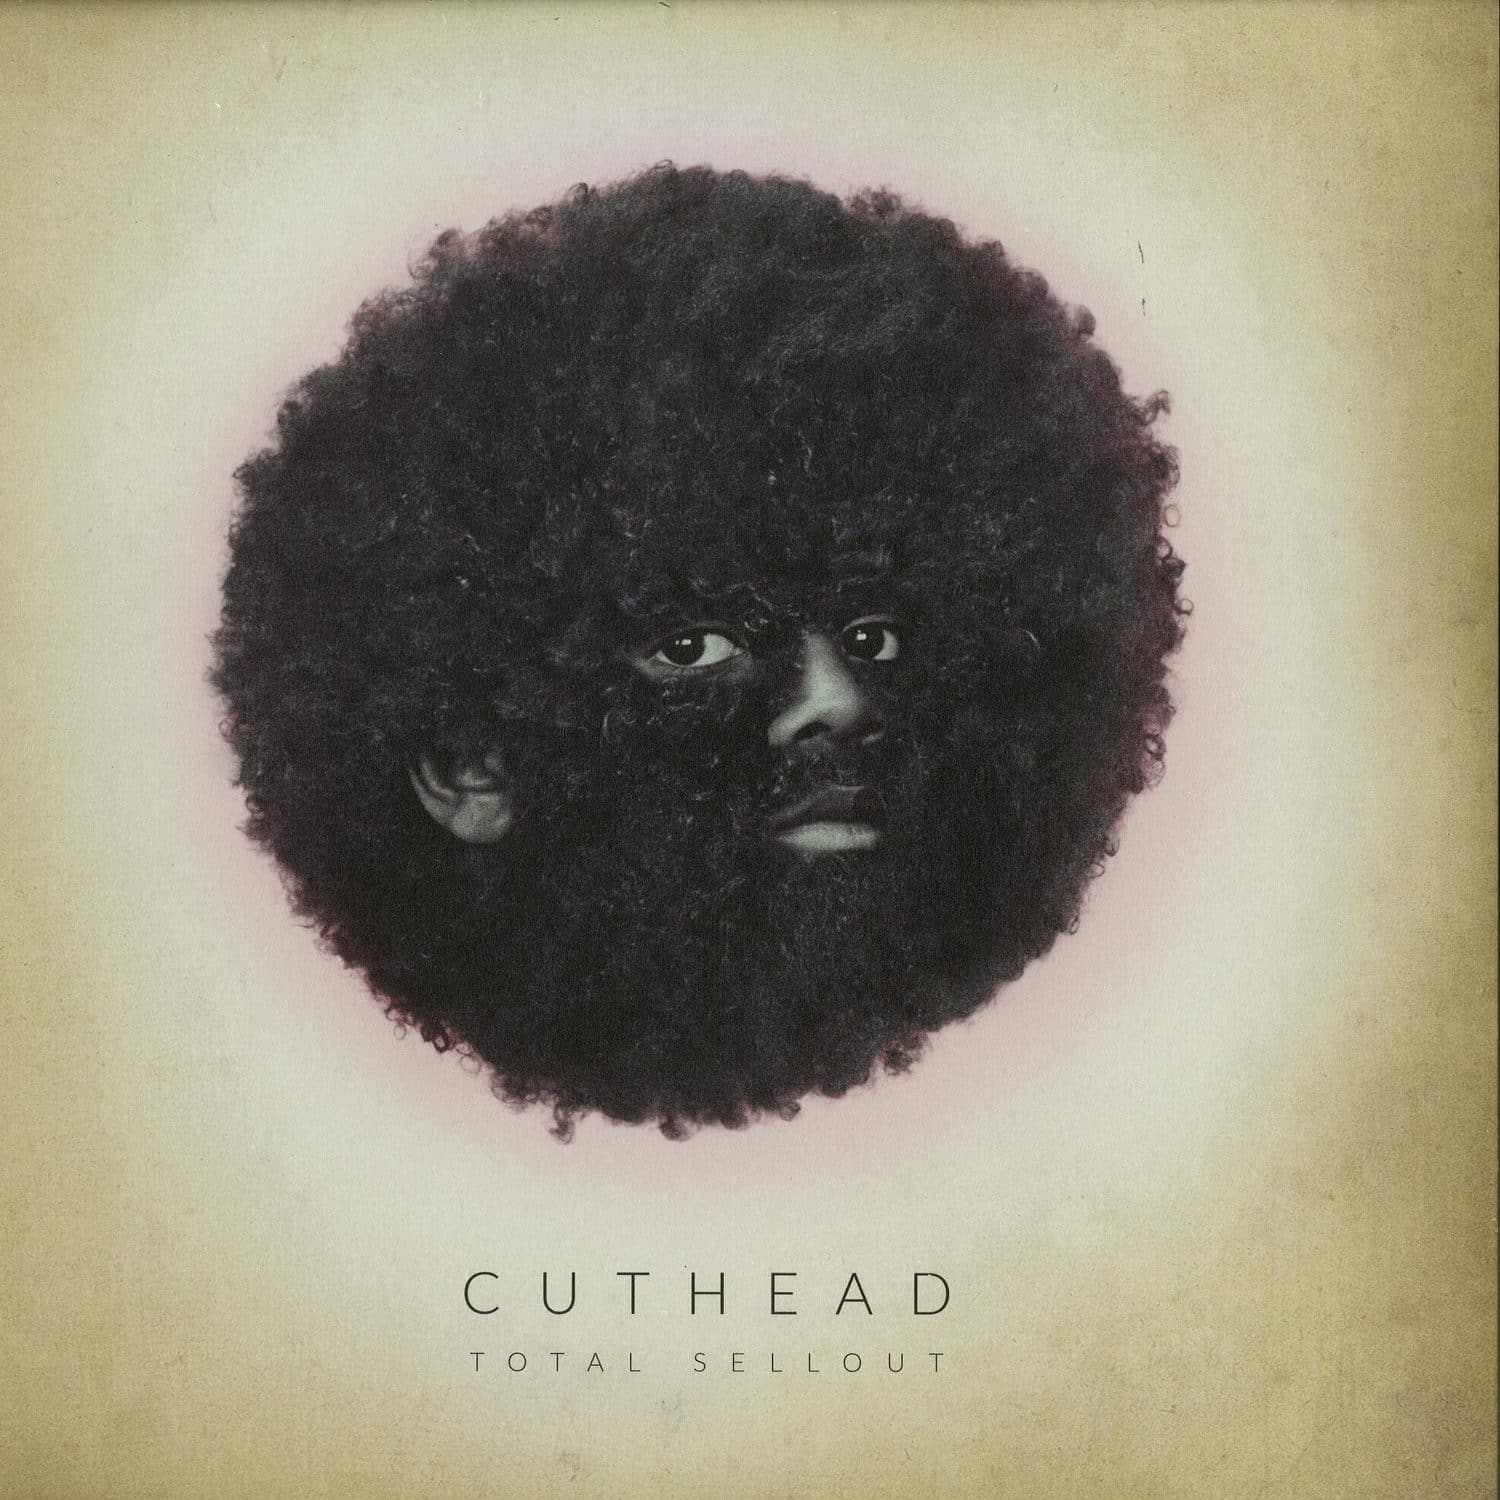 Cuthead - TOTAL SELLOUT 